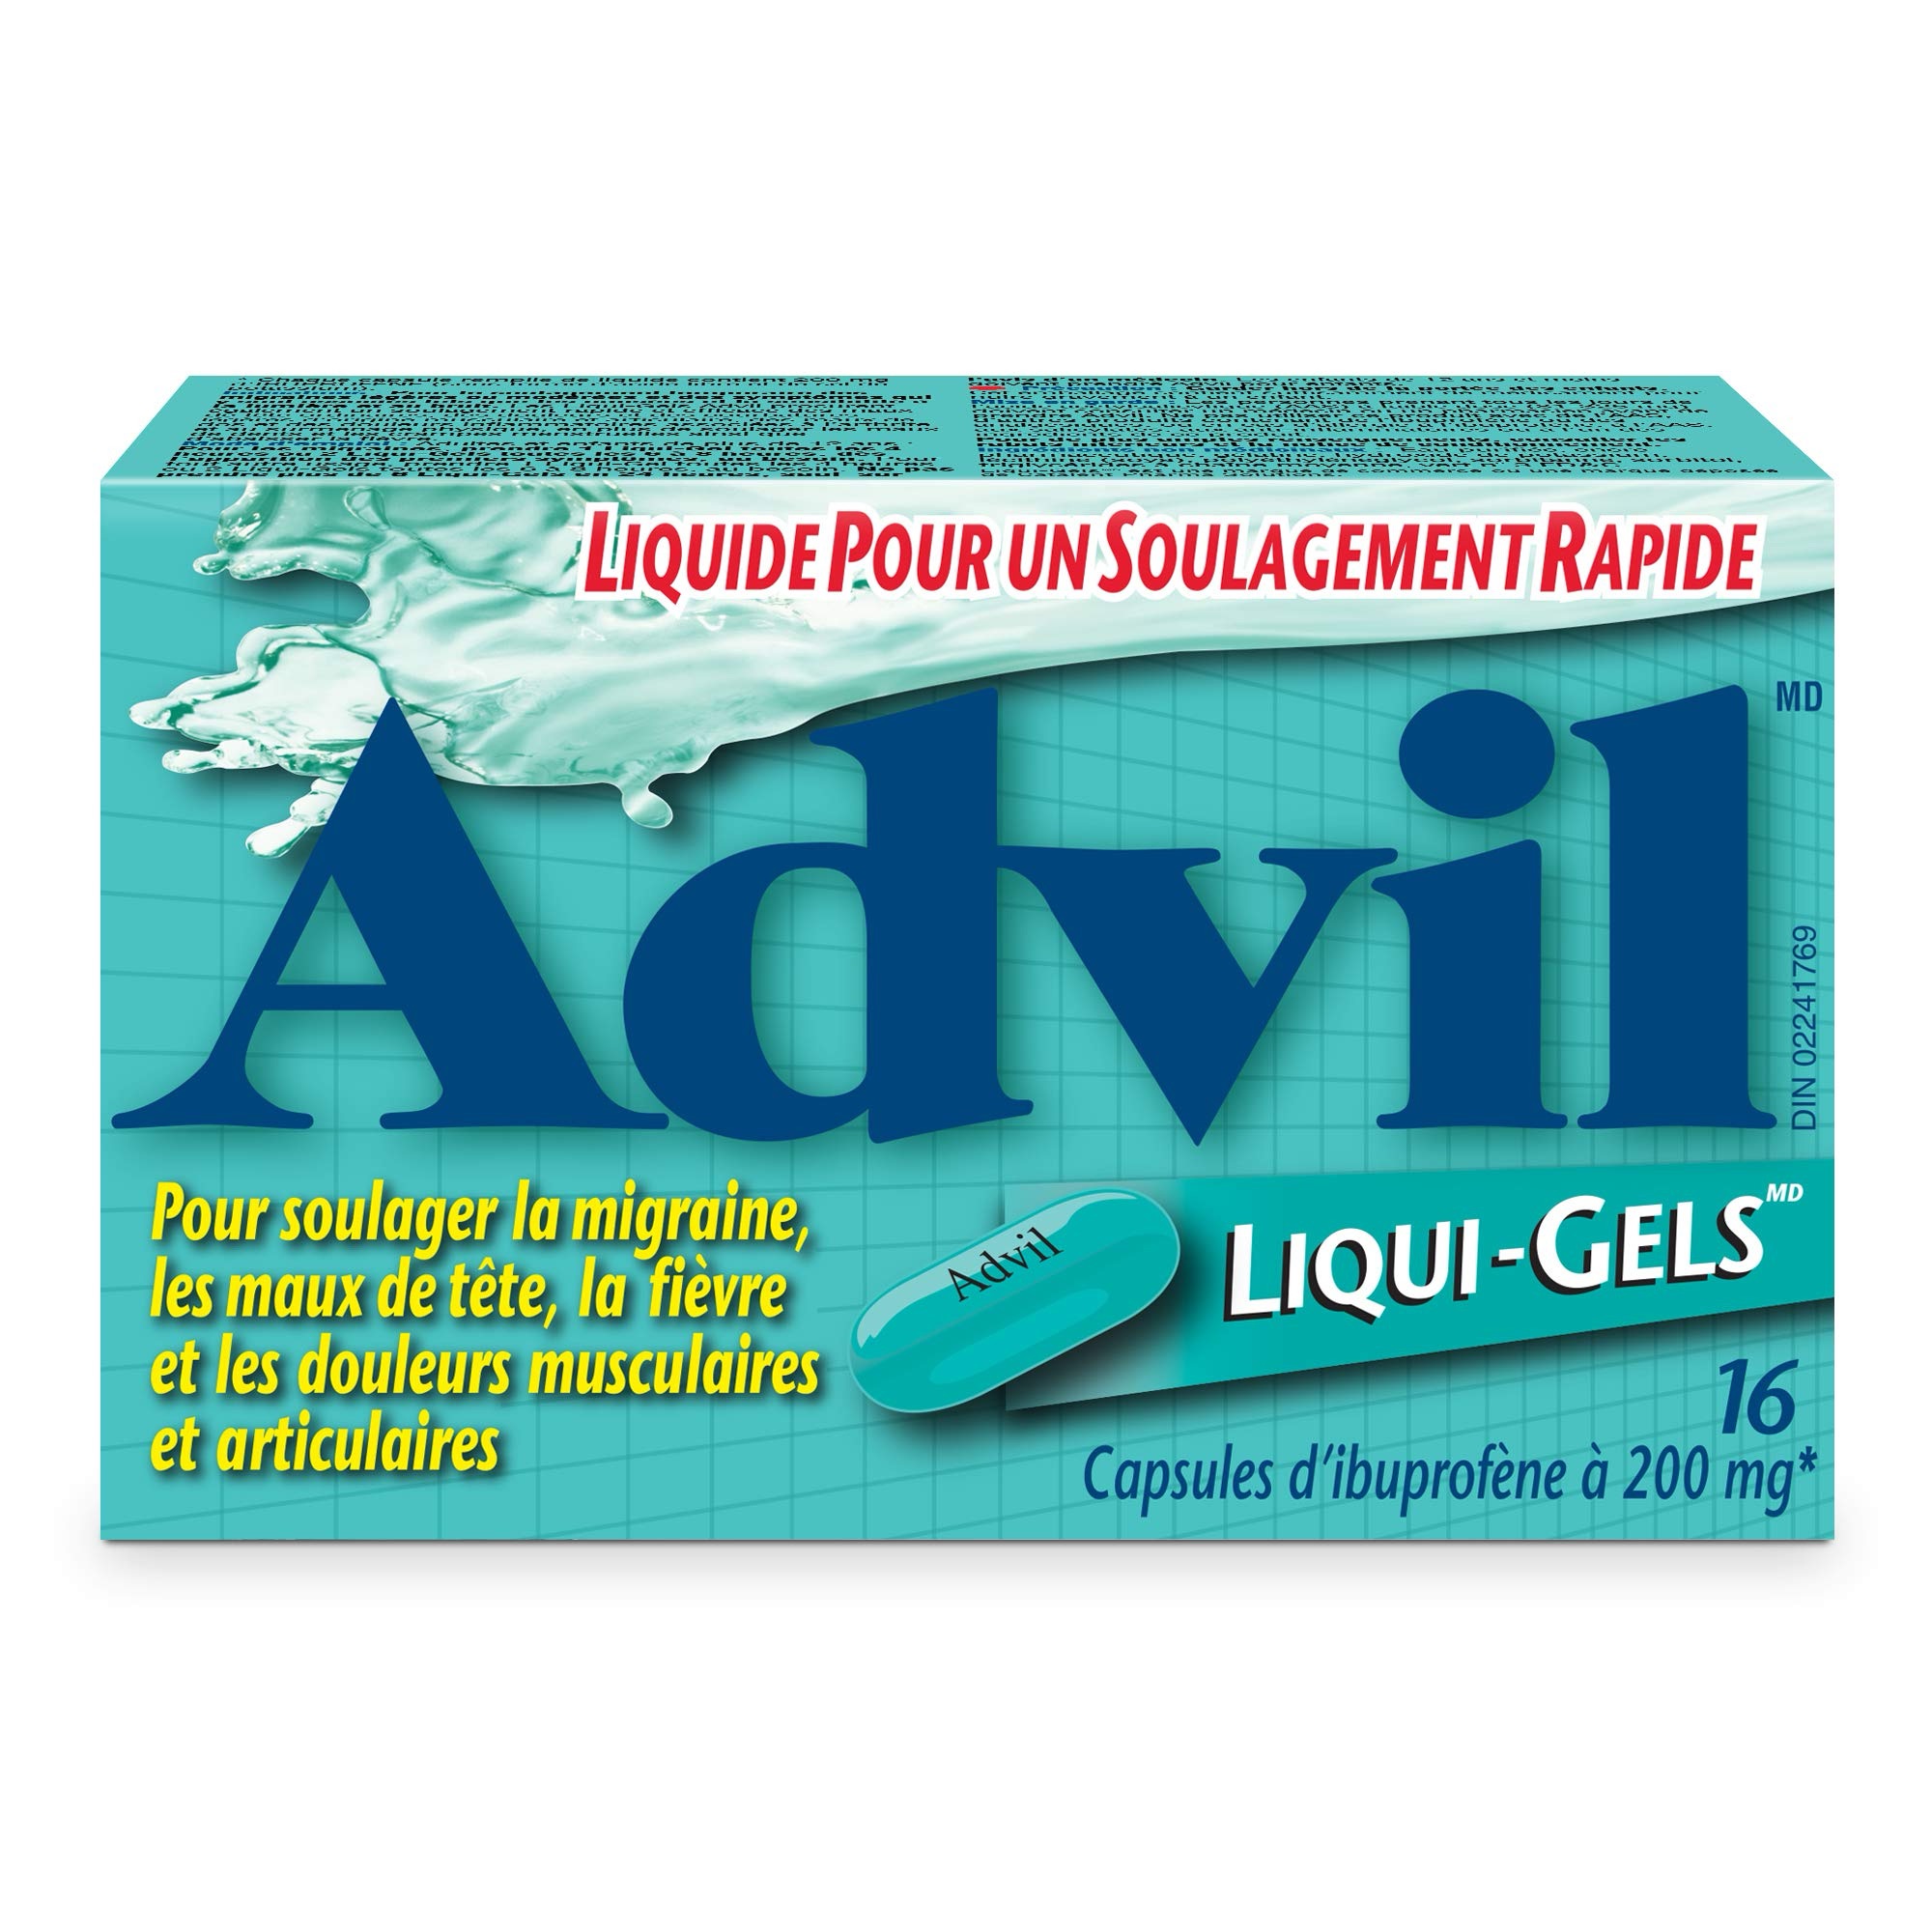 Advil Regular Strength Ibuprofen Pain Relief Liquid-Gels, Fast Acting Pain Relief for Migraine, Arthritis, Back, Neck, Joint, and Muscle Relief, 200mg (16 Count) : Amazon.ca: Health & Personal Care